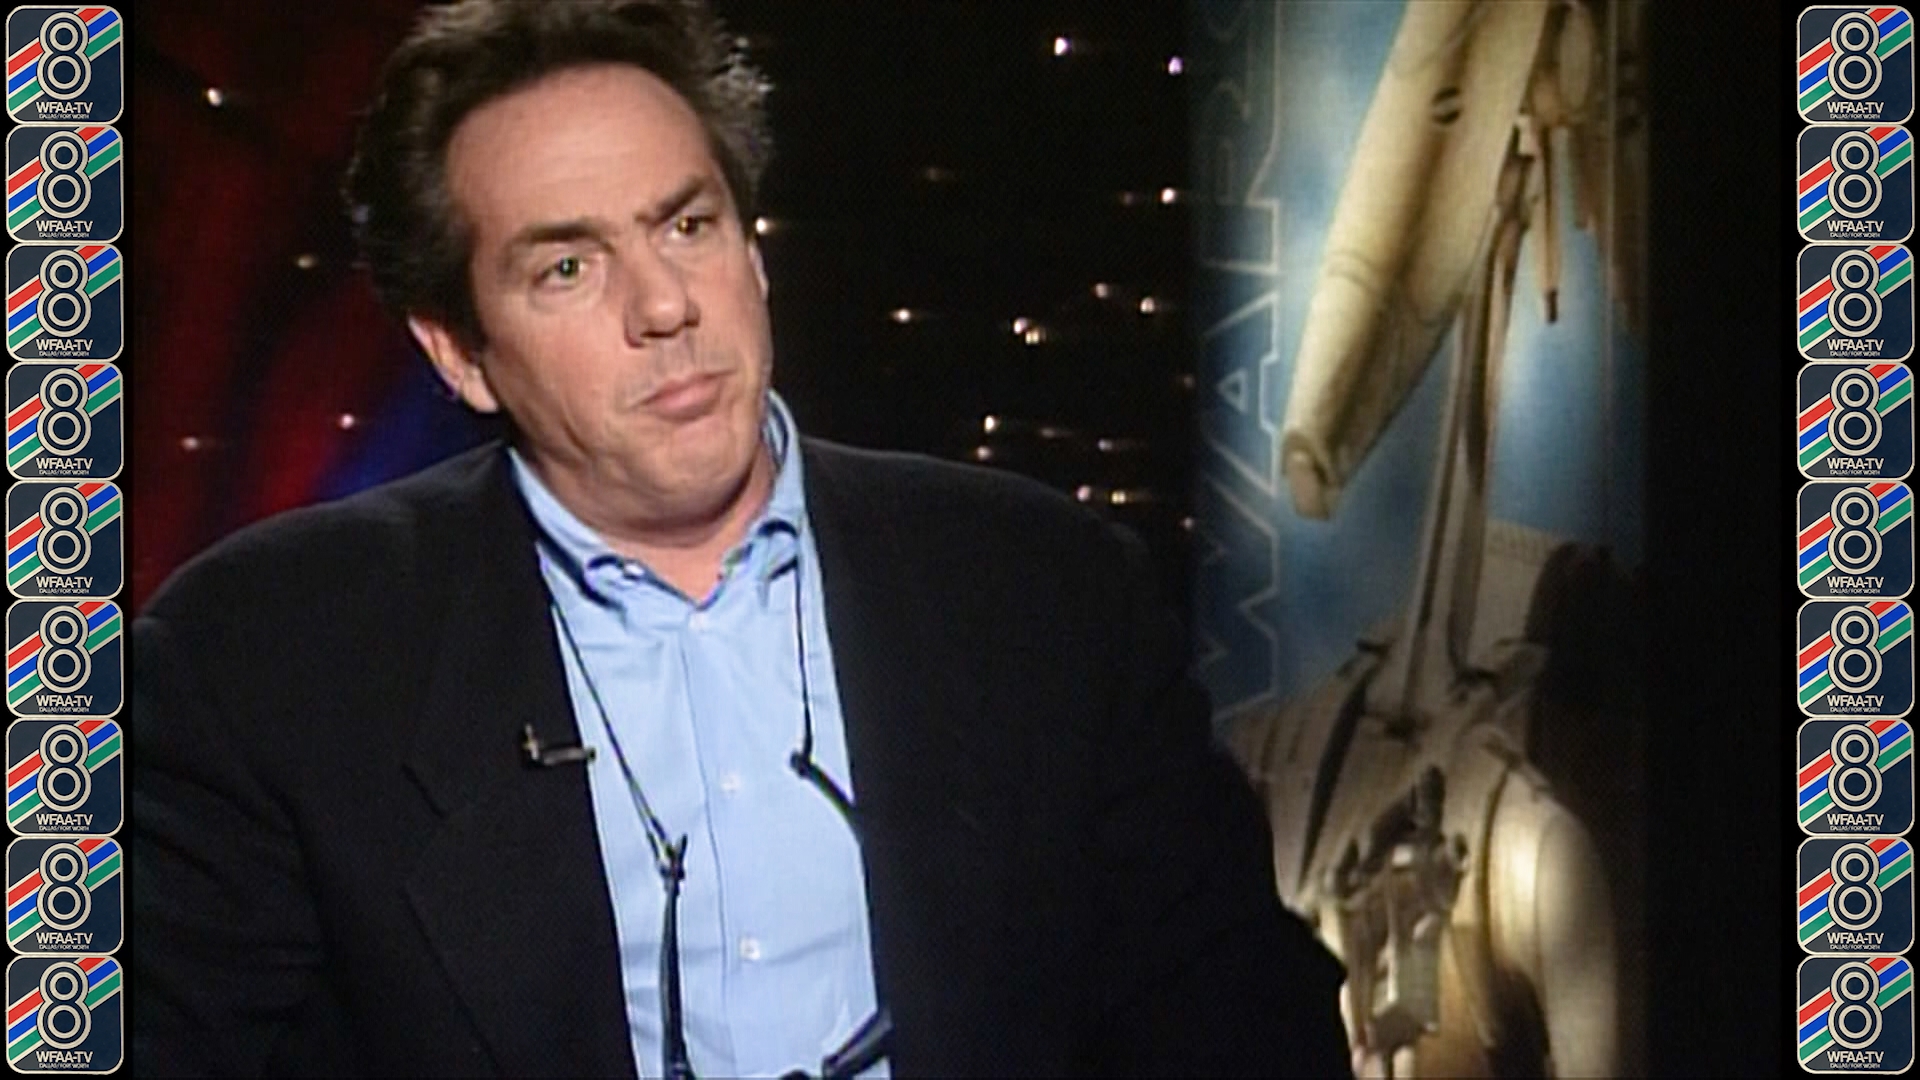 Producer Rick McCallum sat down with WFAA to talk about making the 1999 film Star Wars: Episode I - The Phantom Menace.